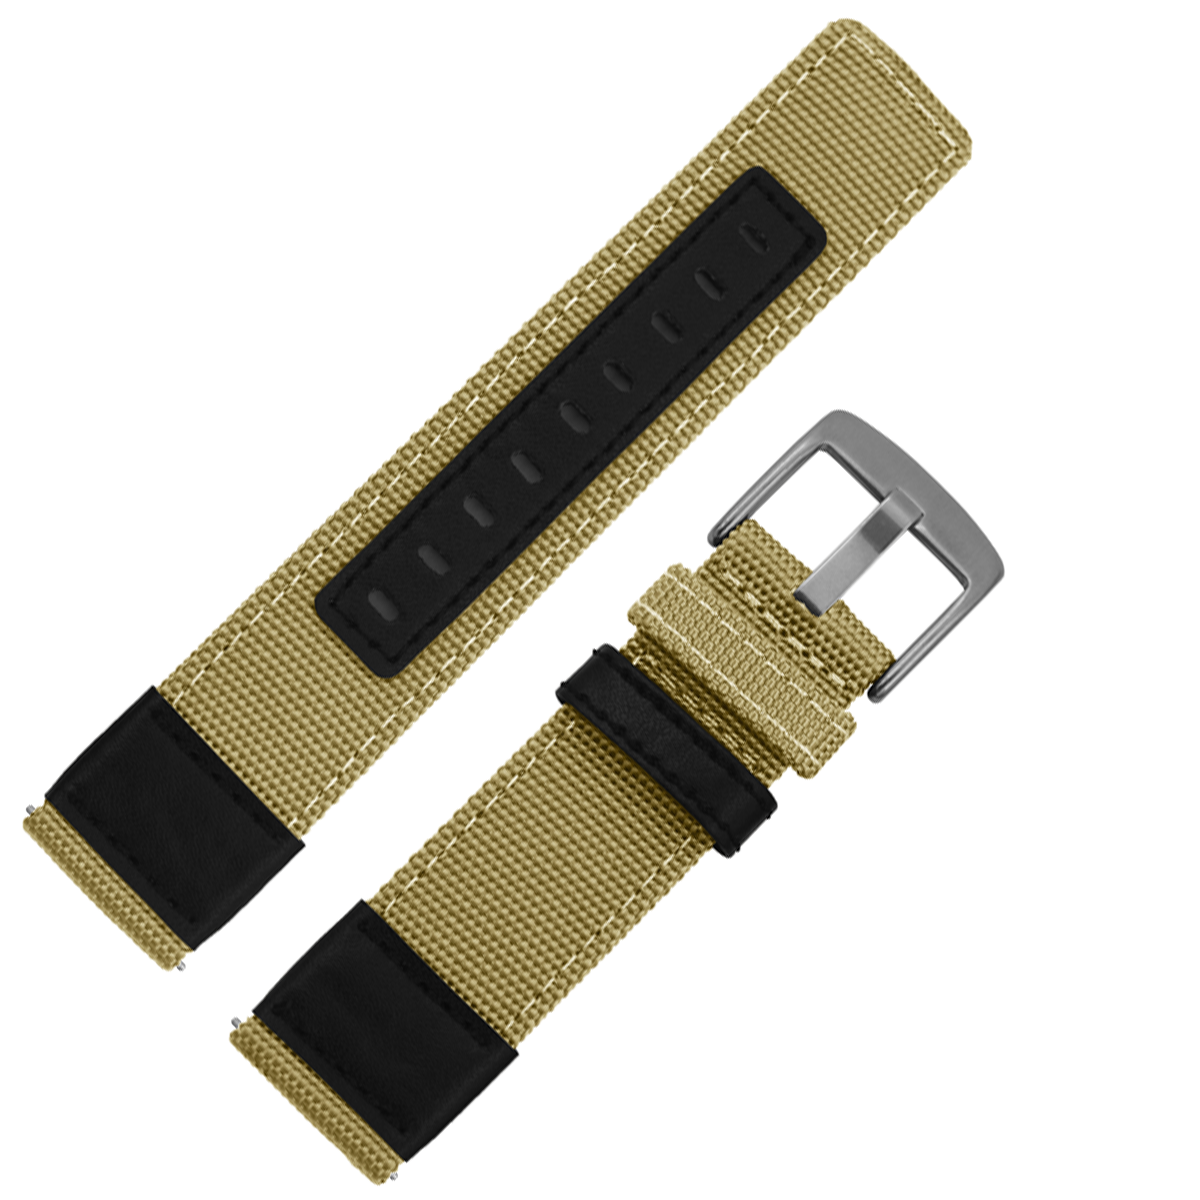 DBLACK [ACE] QUICK RELEASE, DUAL COLOR - NYLON WATCH STRAP // FOR 20MM, 22MM OR 24MM (CHOOSE YOUR SIZE & COLOR)